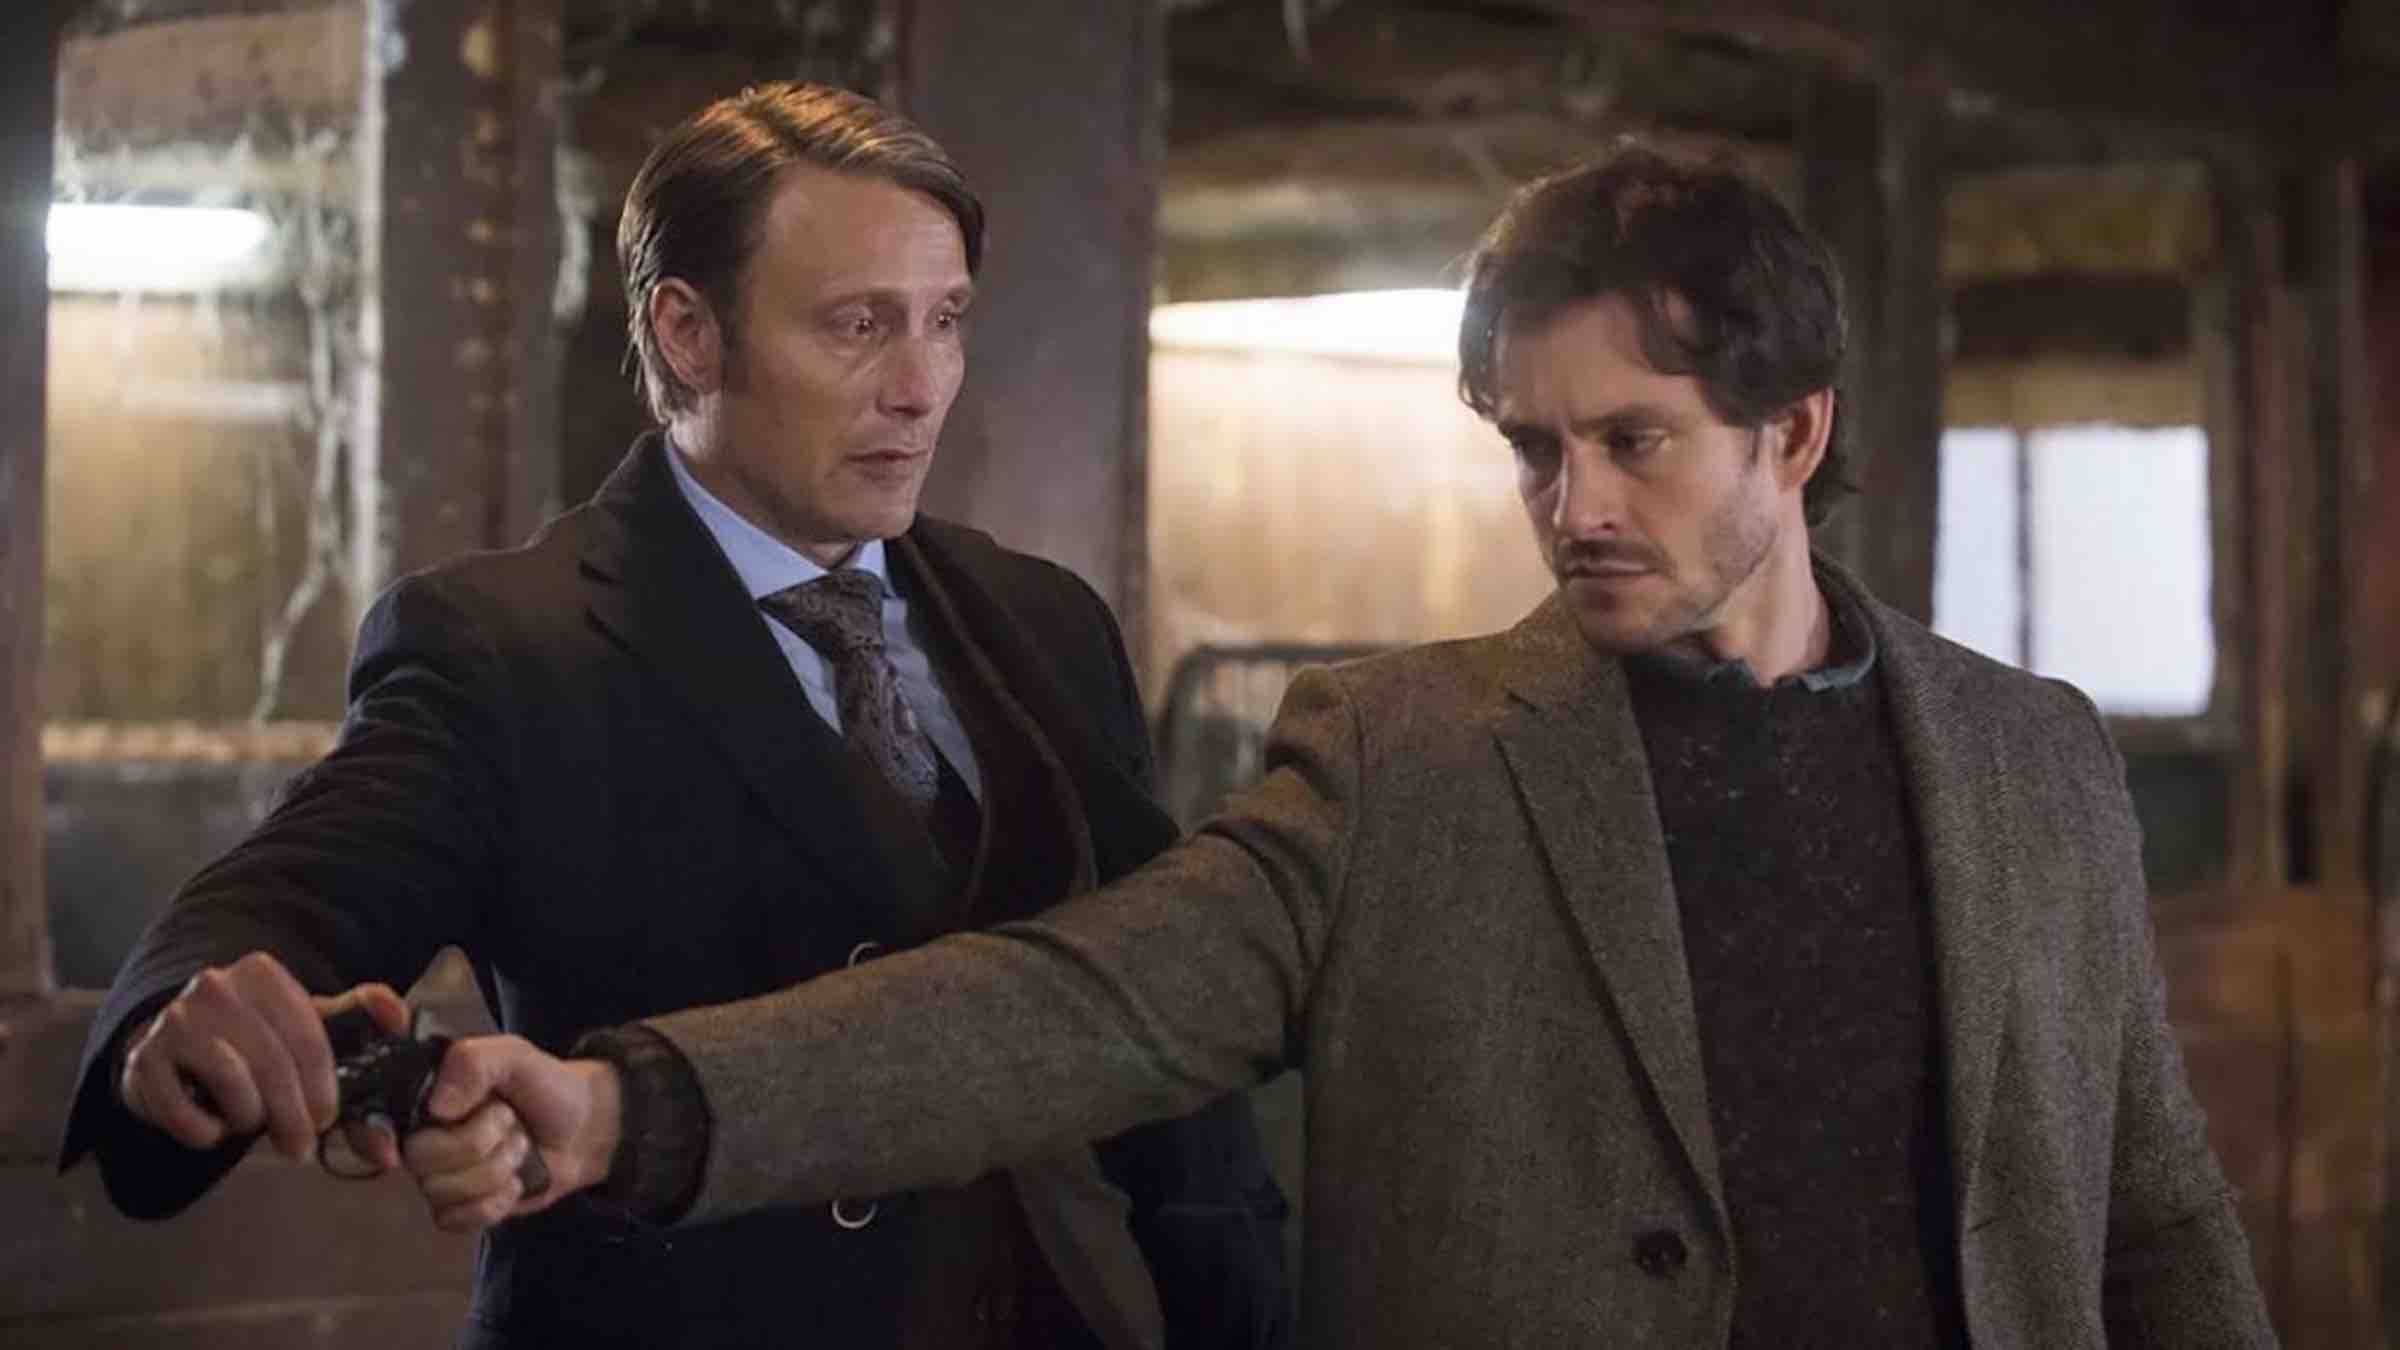 One of the greatest TV tragedies is that Hannibal was canceled after 3 seasons. Here are Hugh Dancy & Hannigram's most heartwarming moments in 'Hannibal'.